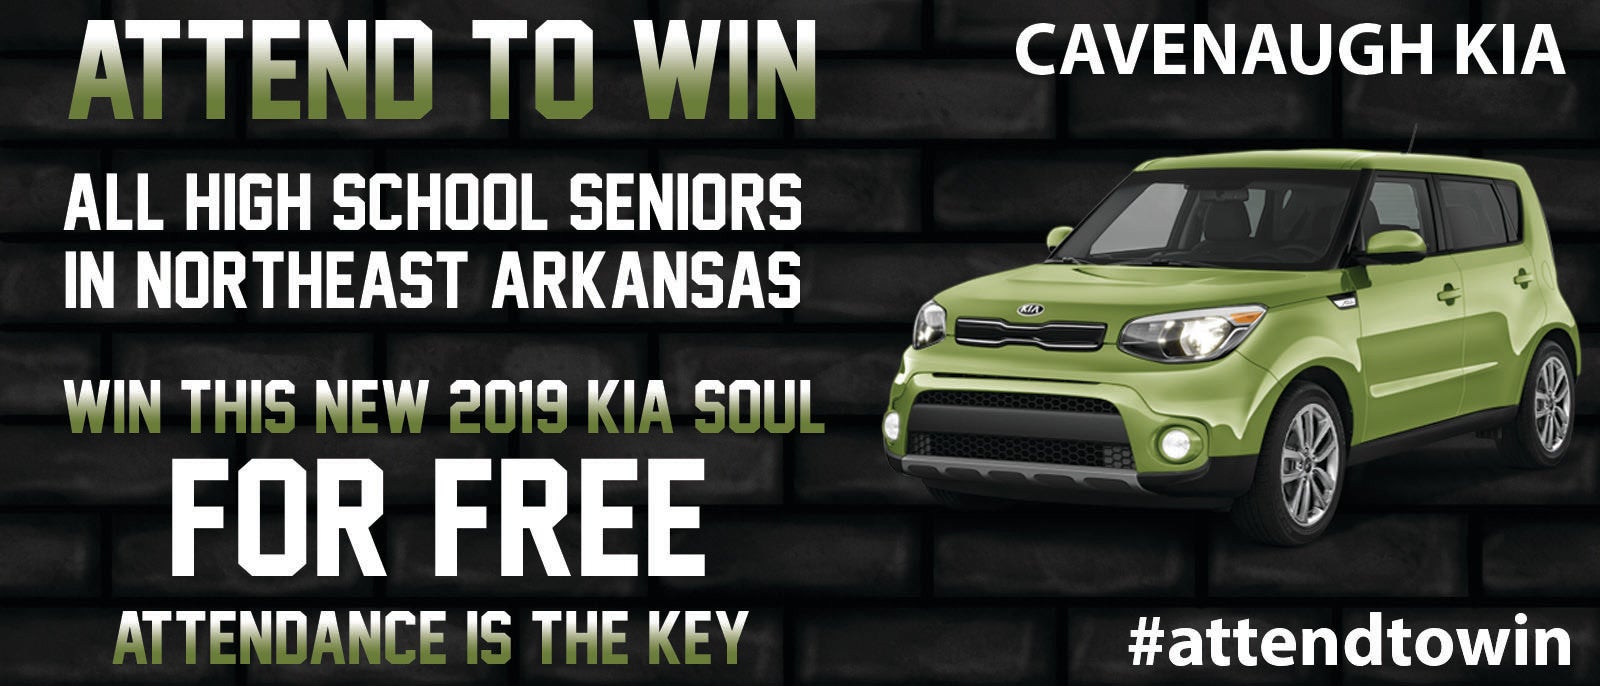 All High School Seniors in Northeast Arkansas - win a new 2019 Kia Soul for free - attendance is the key